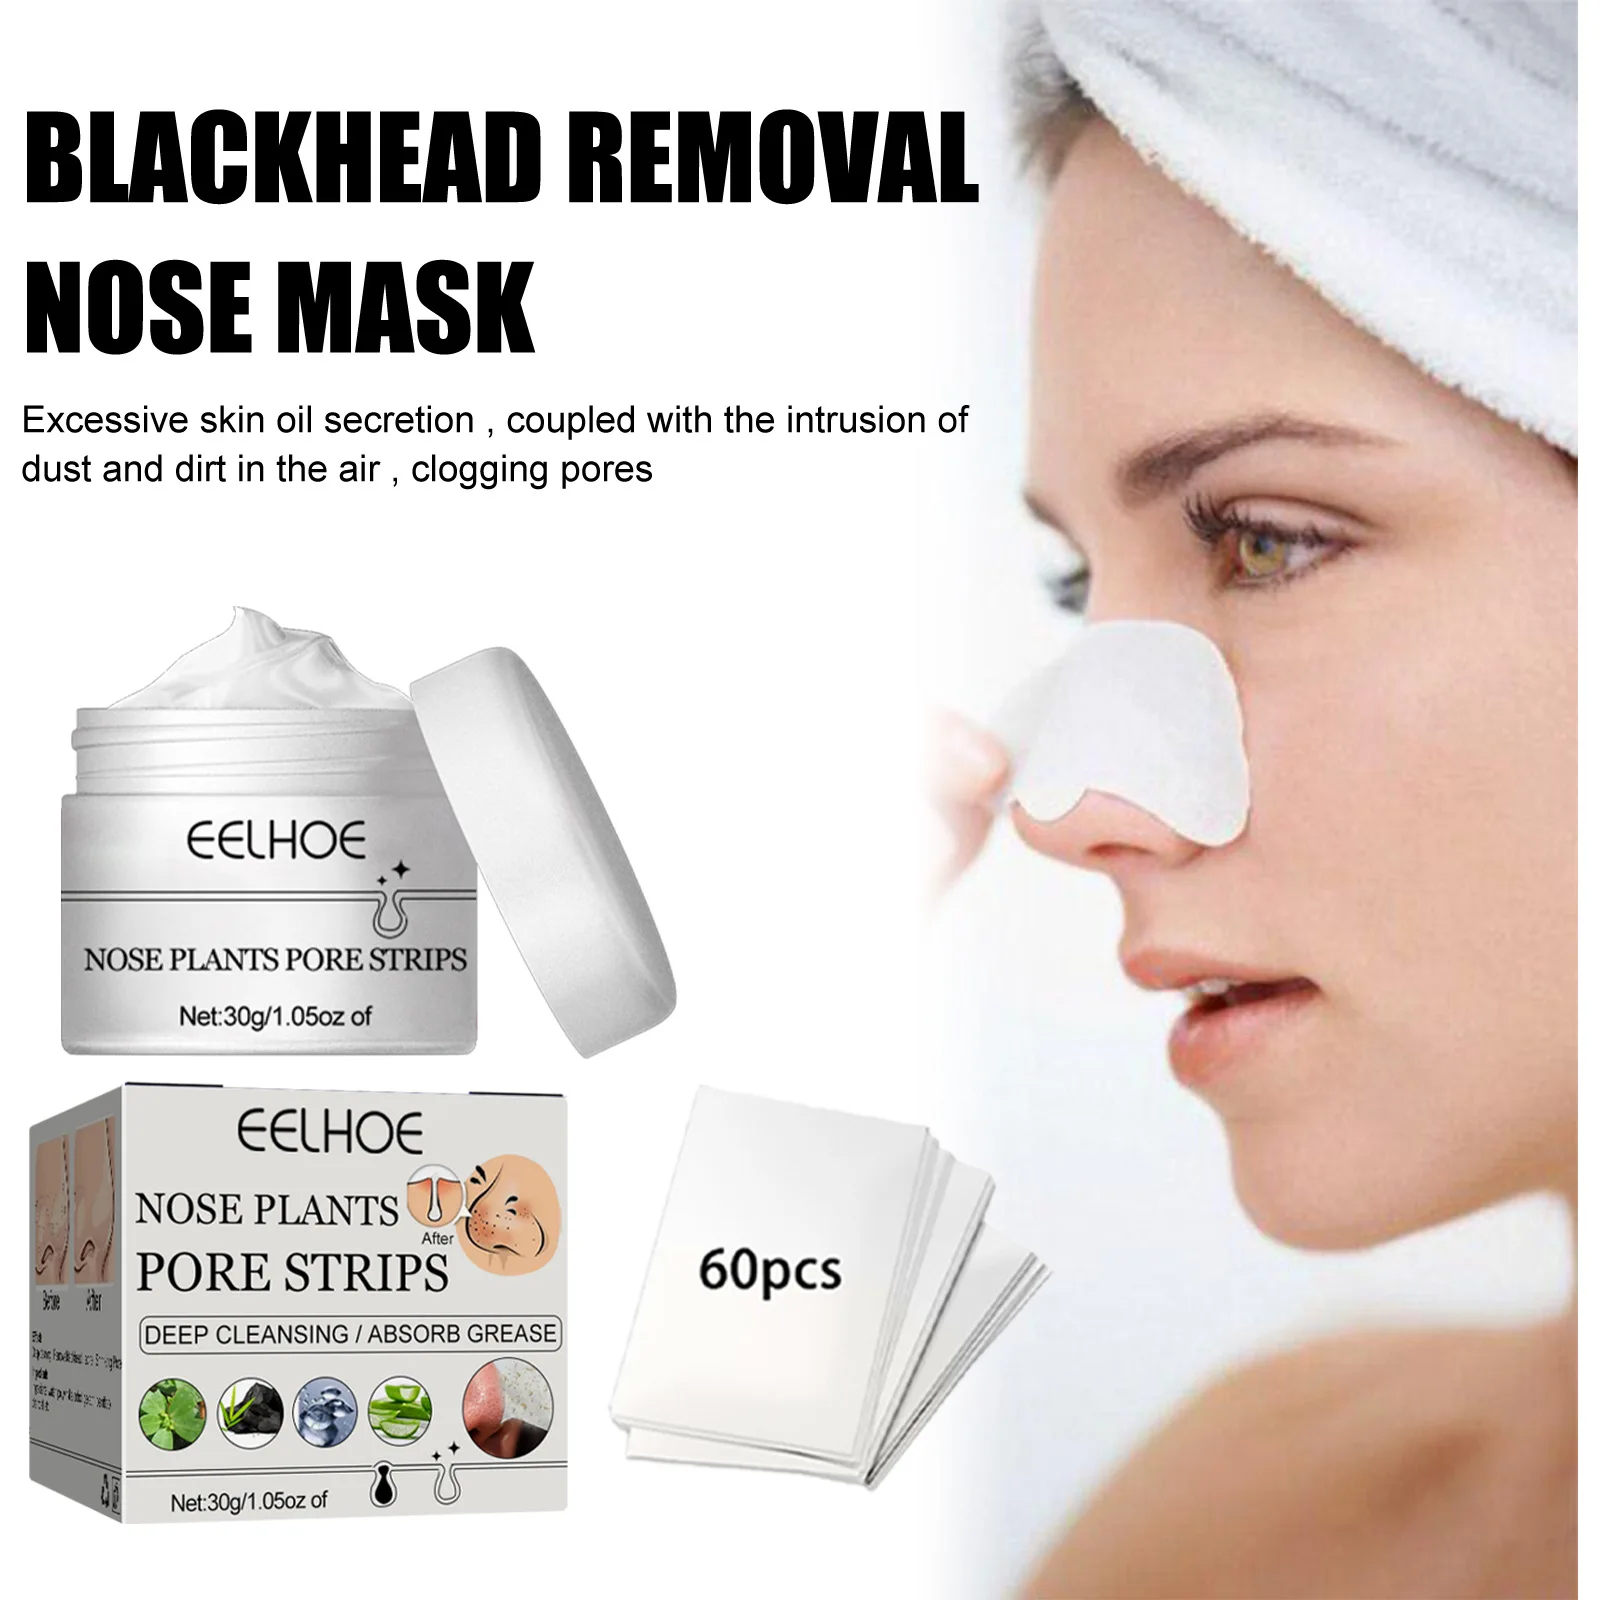 

Remove blackhead nose mask gentle deep cleaning pore suction acne blackheads with 60 sheets of paper tear pulling nose mask